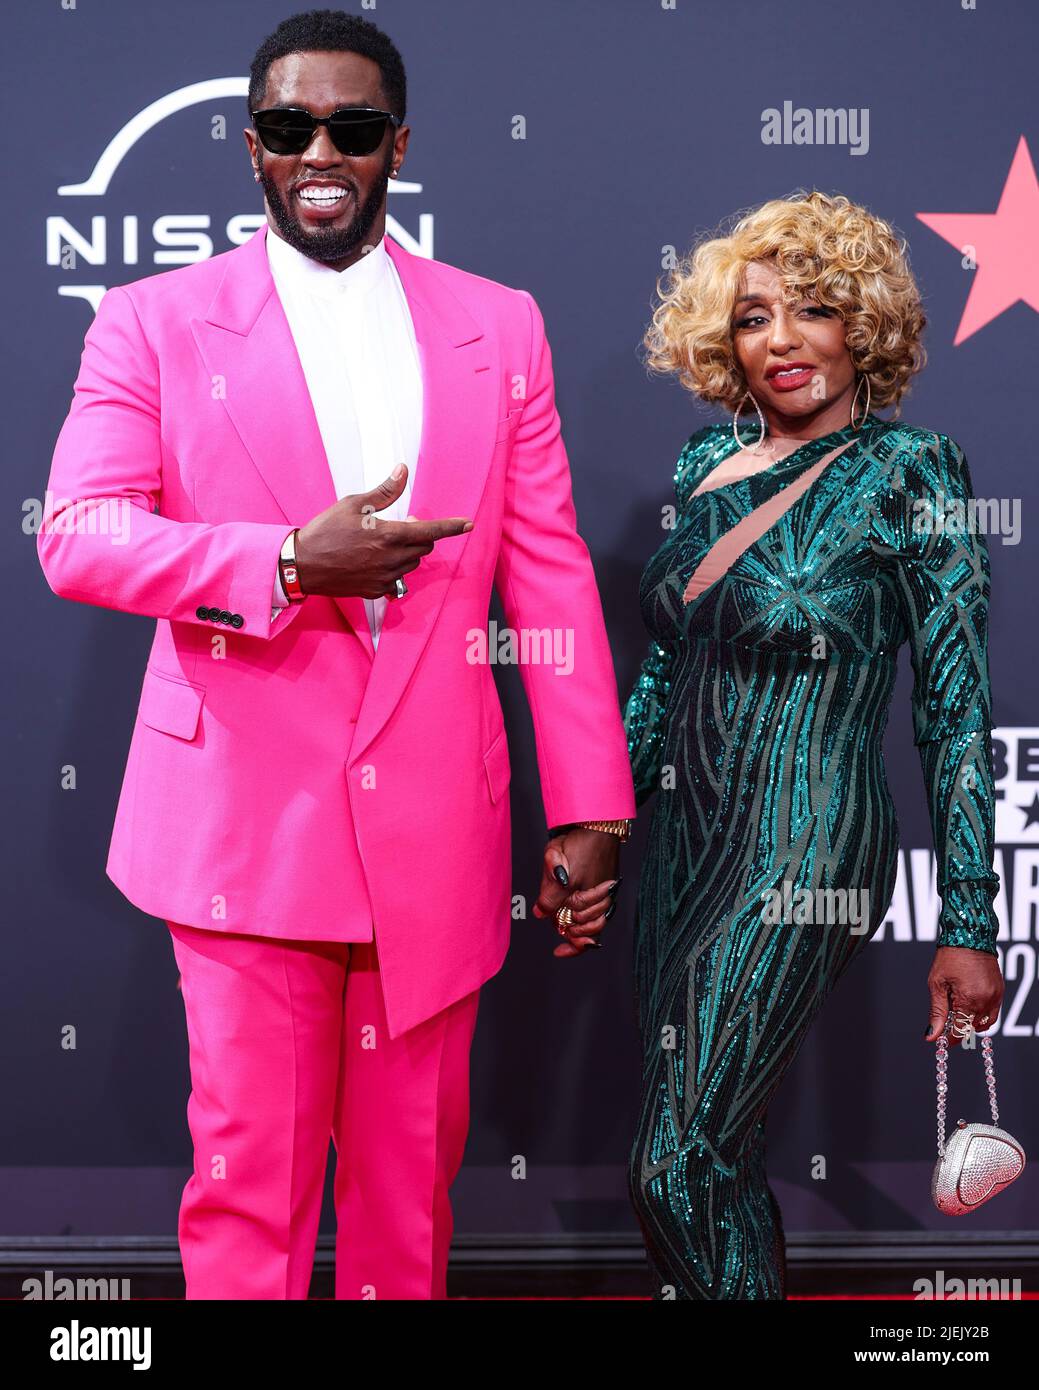 LOS ANGELES, CALIFORNIA, USA - JUNE 26: Sean Diddy Combs and mother Janice Combs arrive at the BET Awards 2022 held at Microsoft Theater at L.A. Live on June 26, 2022 in Los Angeles, California, United States. (Photo by Xavier Collin/Image Press Agency) Credit: Image Press Agency/Alamy Live News Stock Photo